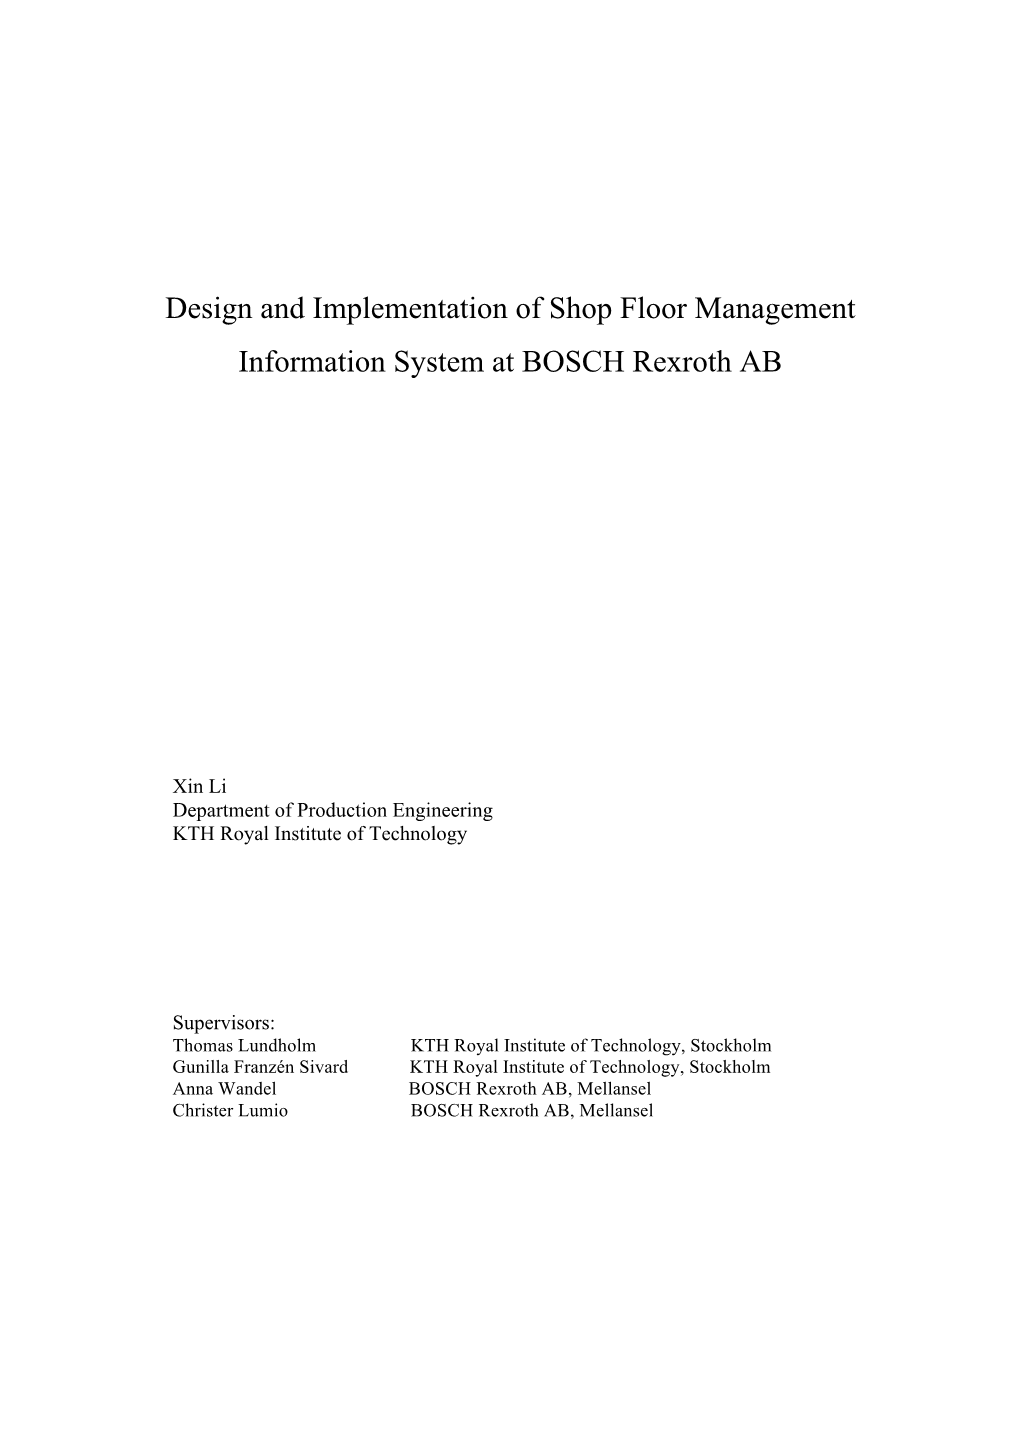 Design and Implementation of Shop Floor Management Information System at BOSCH Rexroth AB